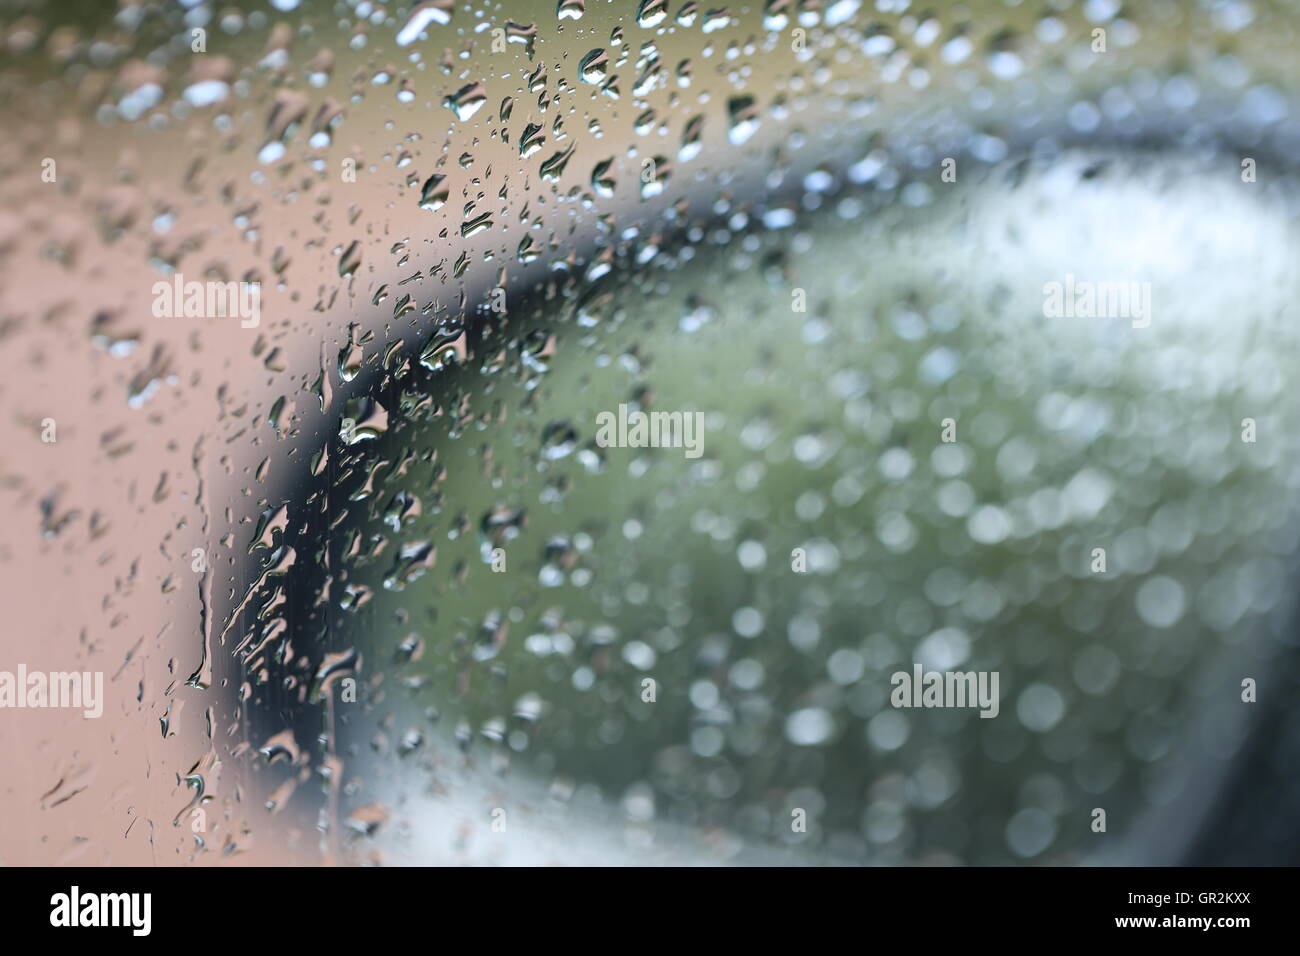 Wet Car Side Mirror. Side mirror of a car through the windshield in the rain. Rain drops on the car glass window. Stock Photo